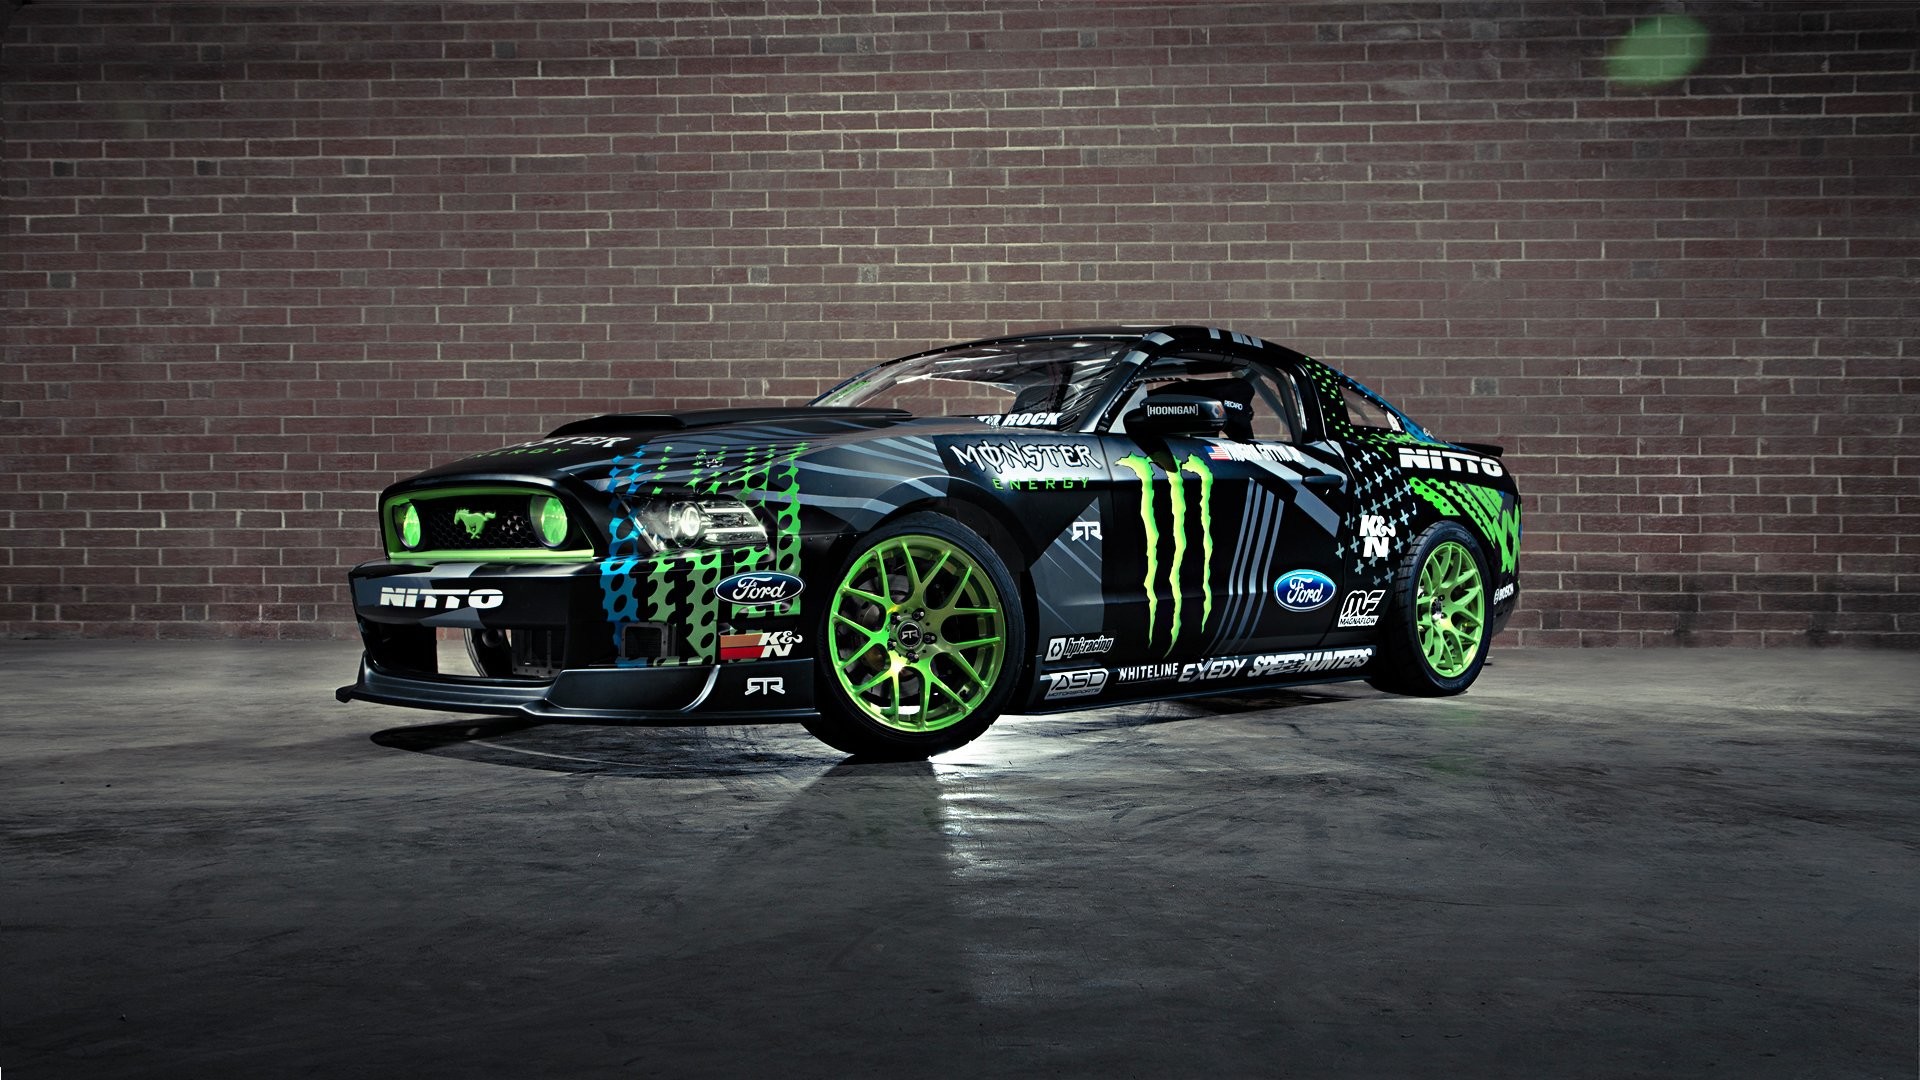 1920x1080 Download Monster Energy Wallpaper For Iphone #e0n47 Â» hdxwallpaperz .